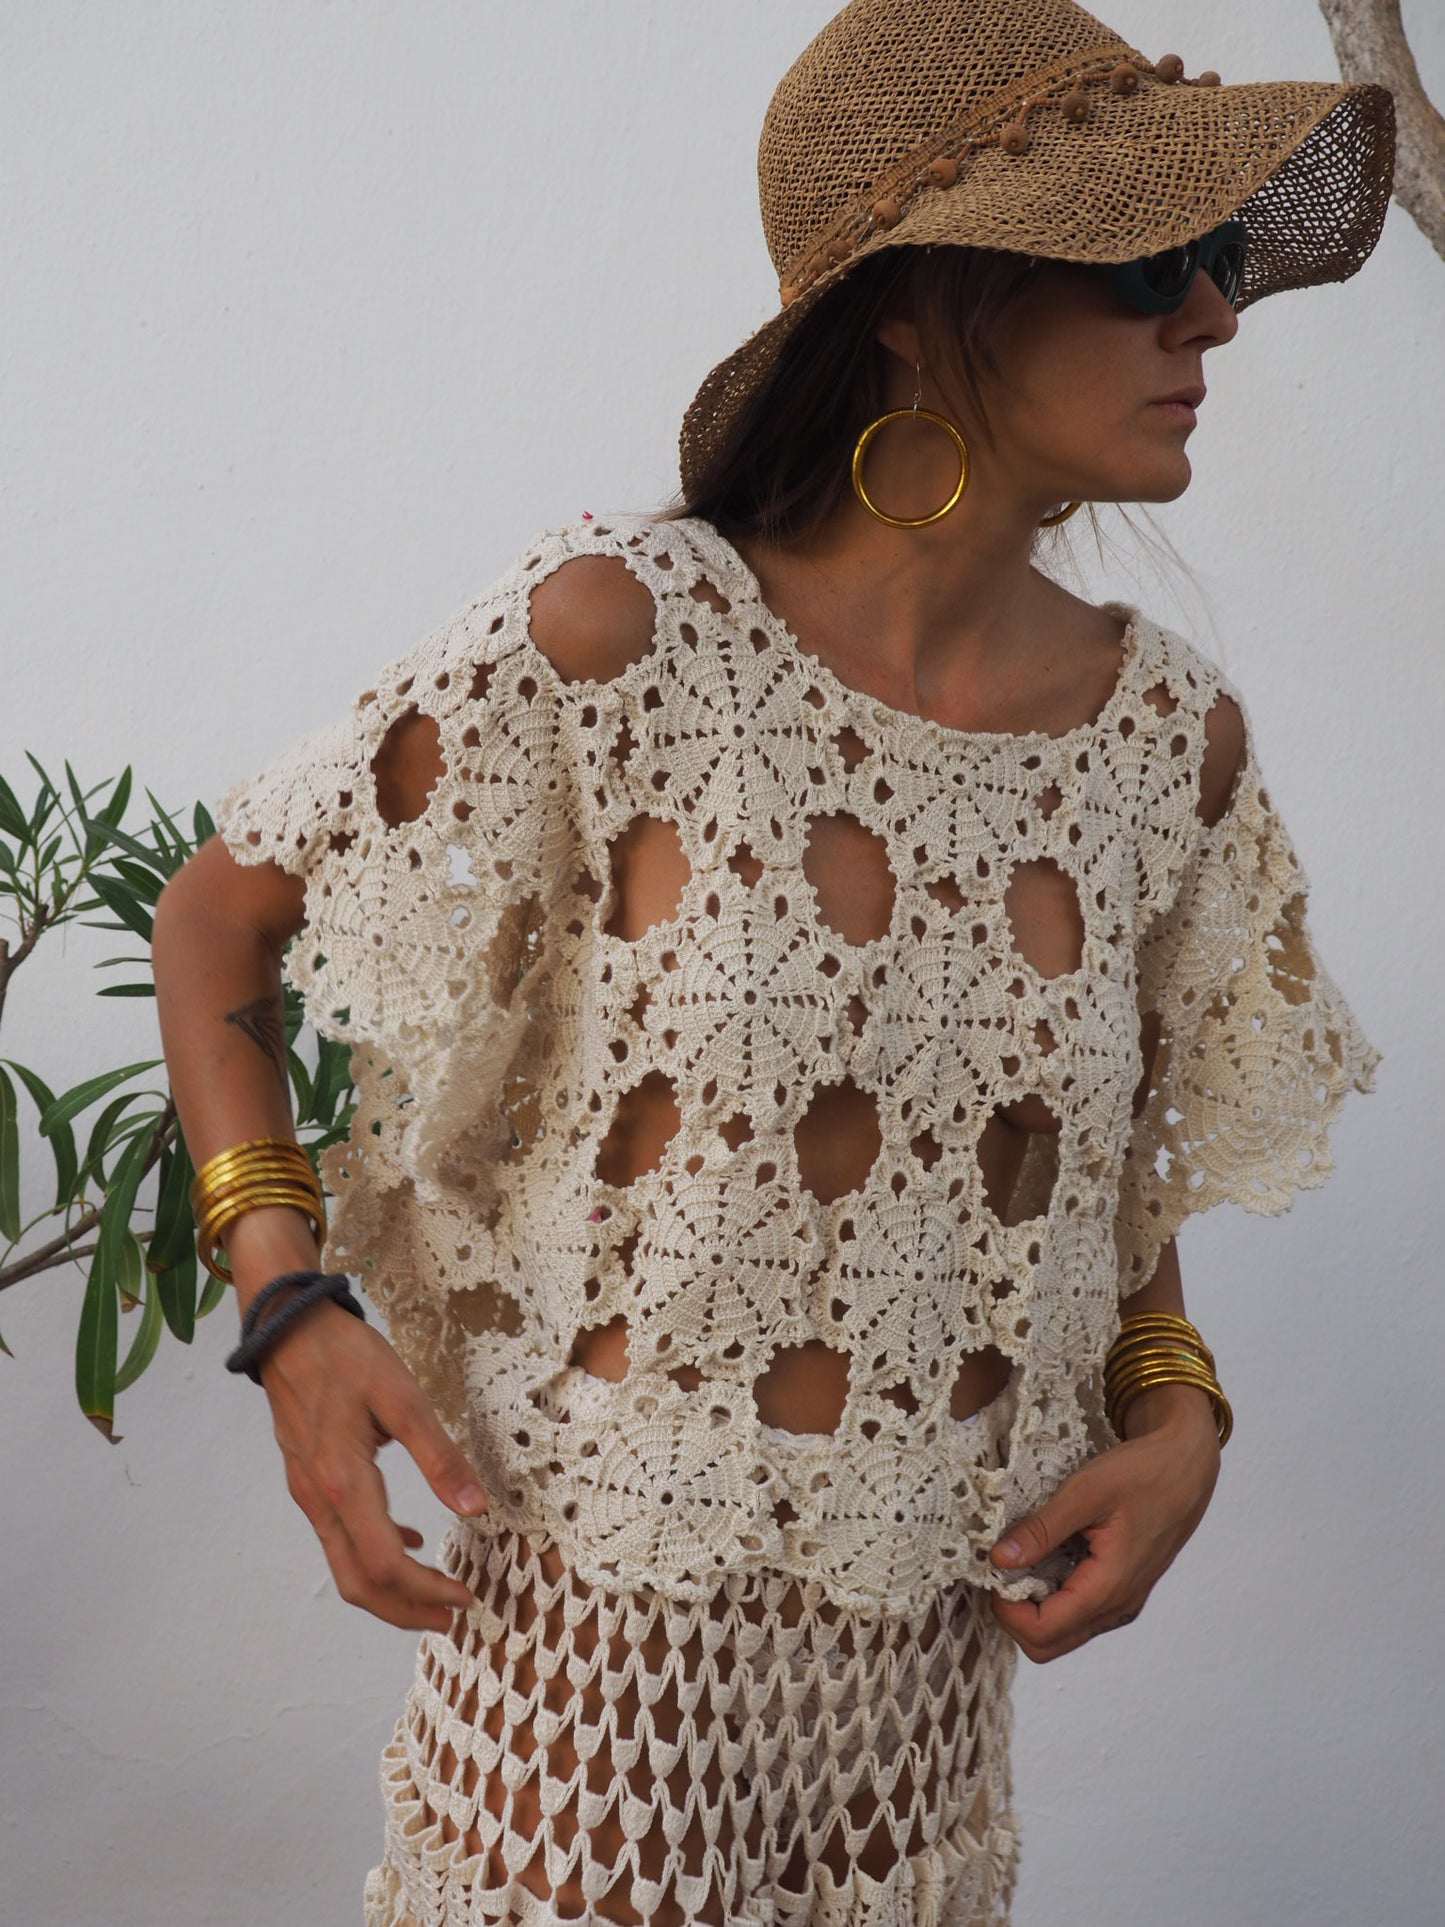 Amazing one of a kind cream vintage crochet lace top up-cycled by Vagabond Ibiza